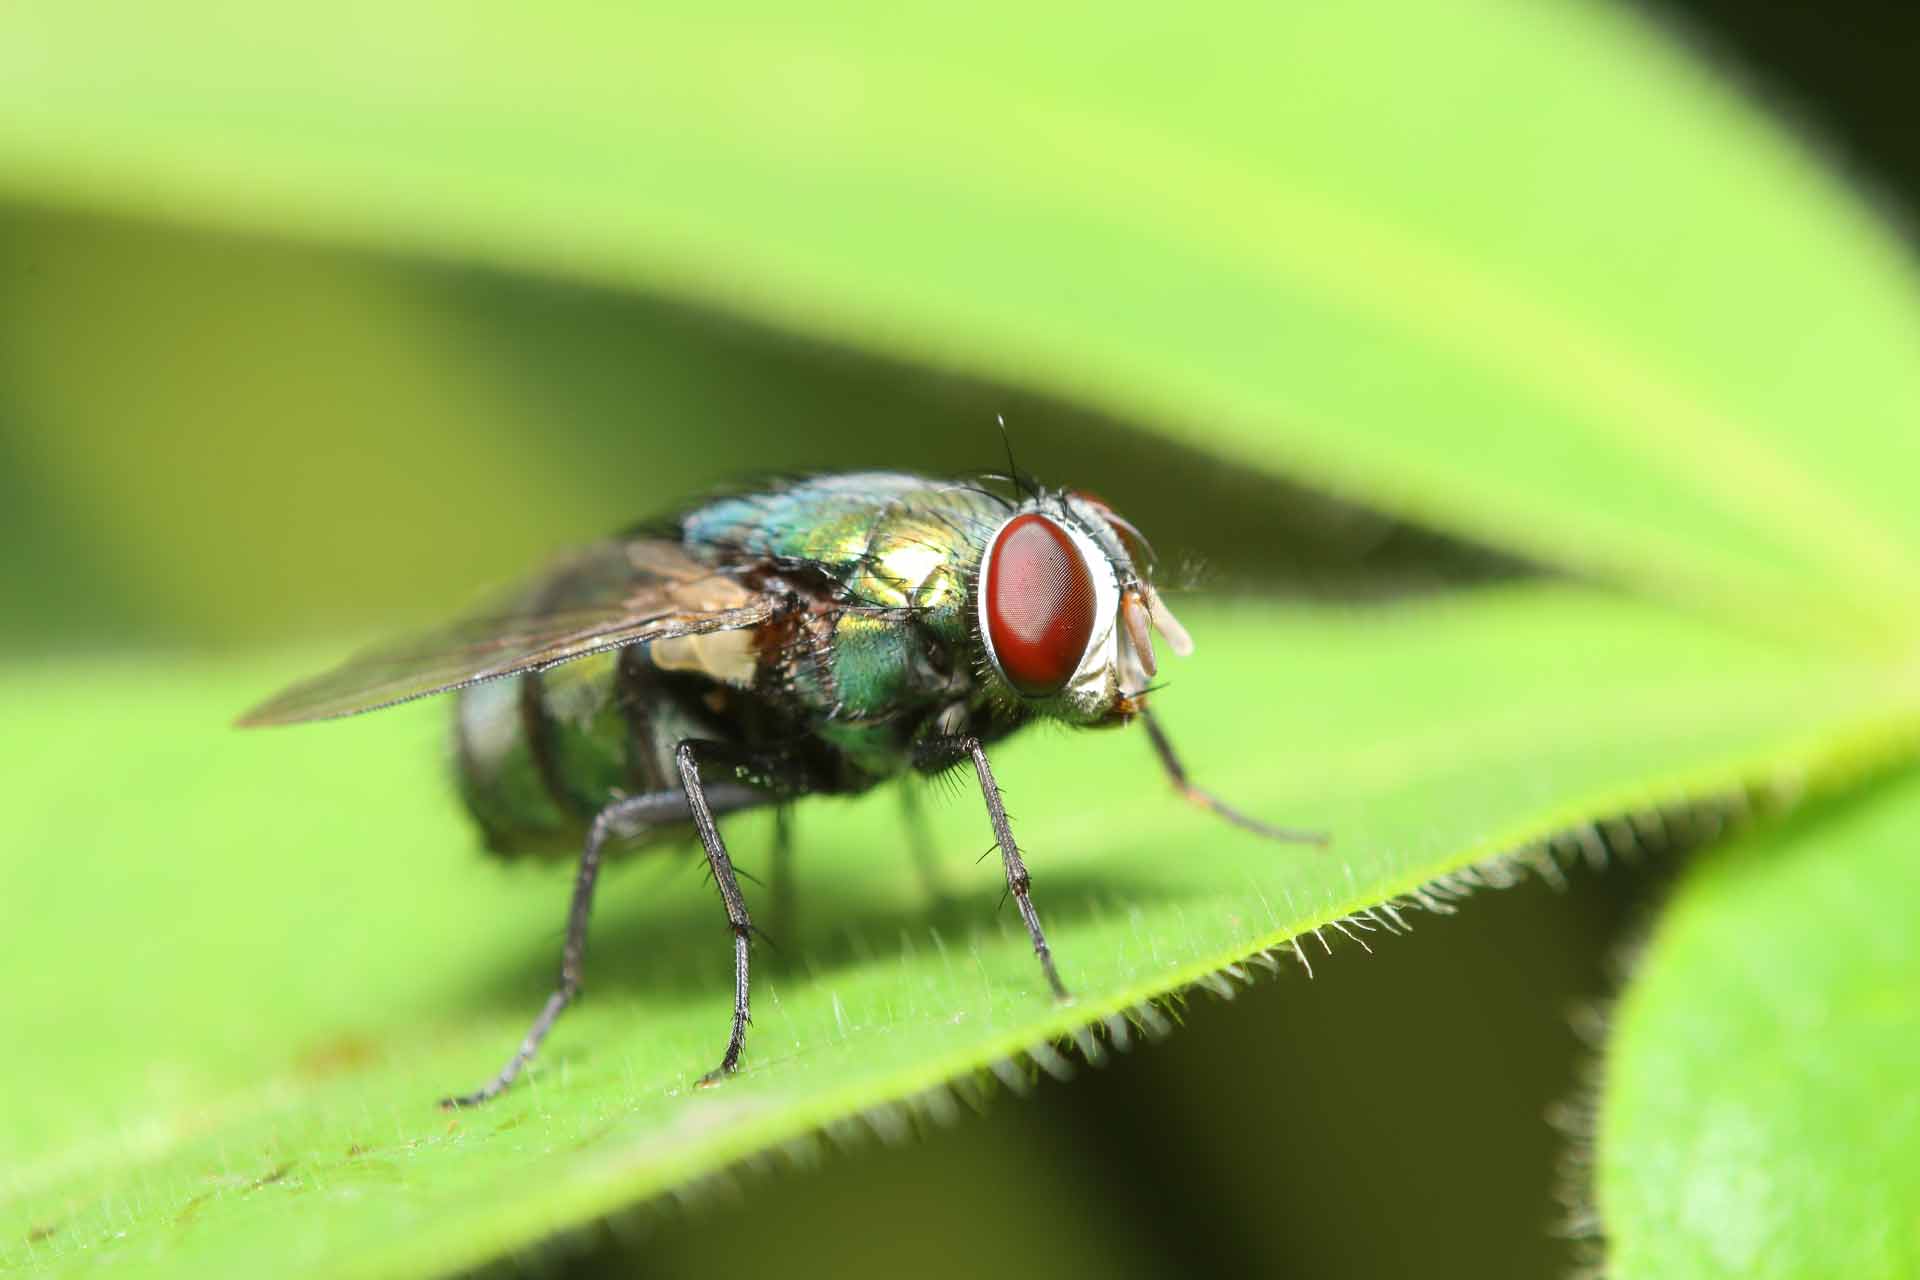 Housefly, FREE Stock Photo: Fly Rests on Leaf, Macro Photo, Royalty ...